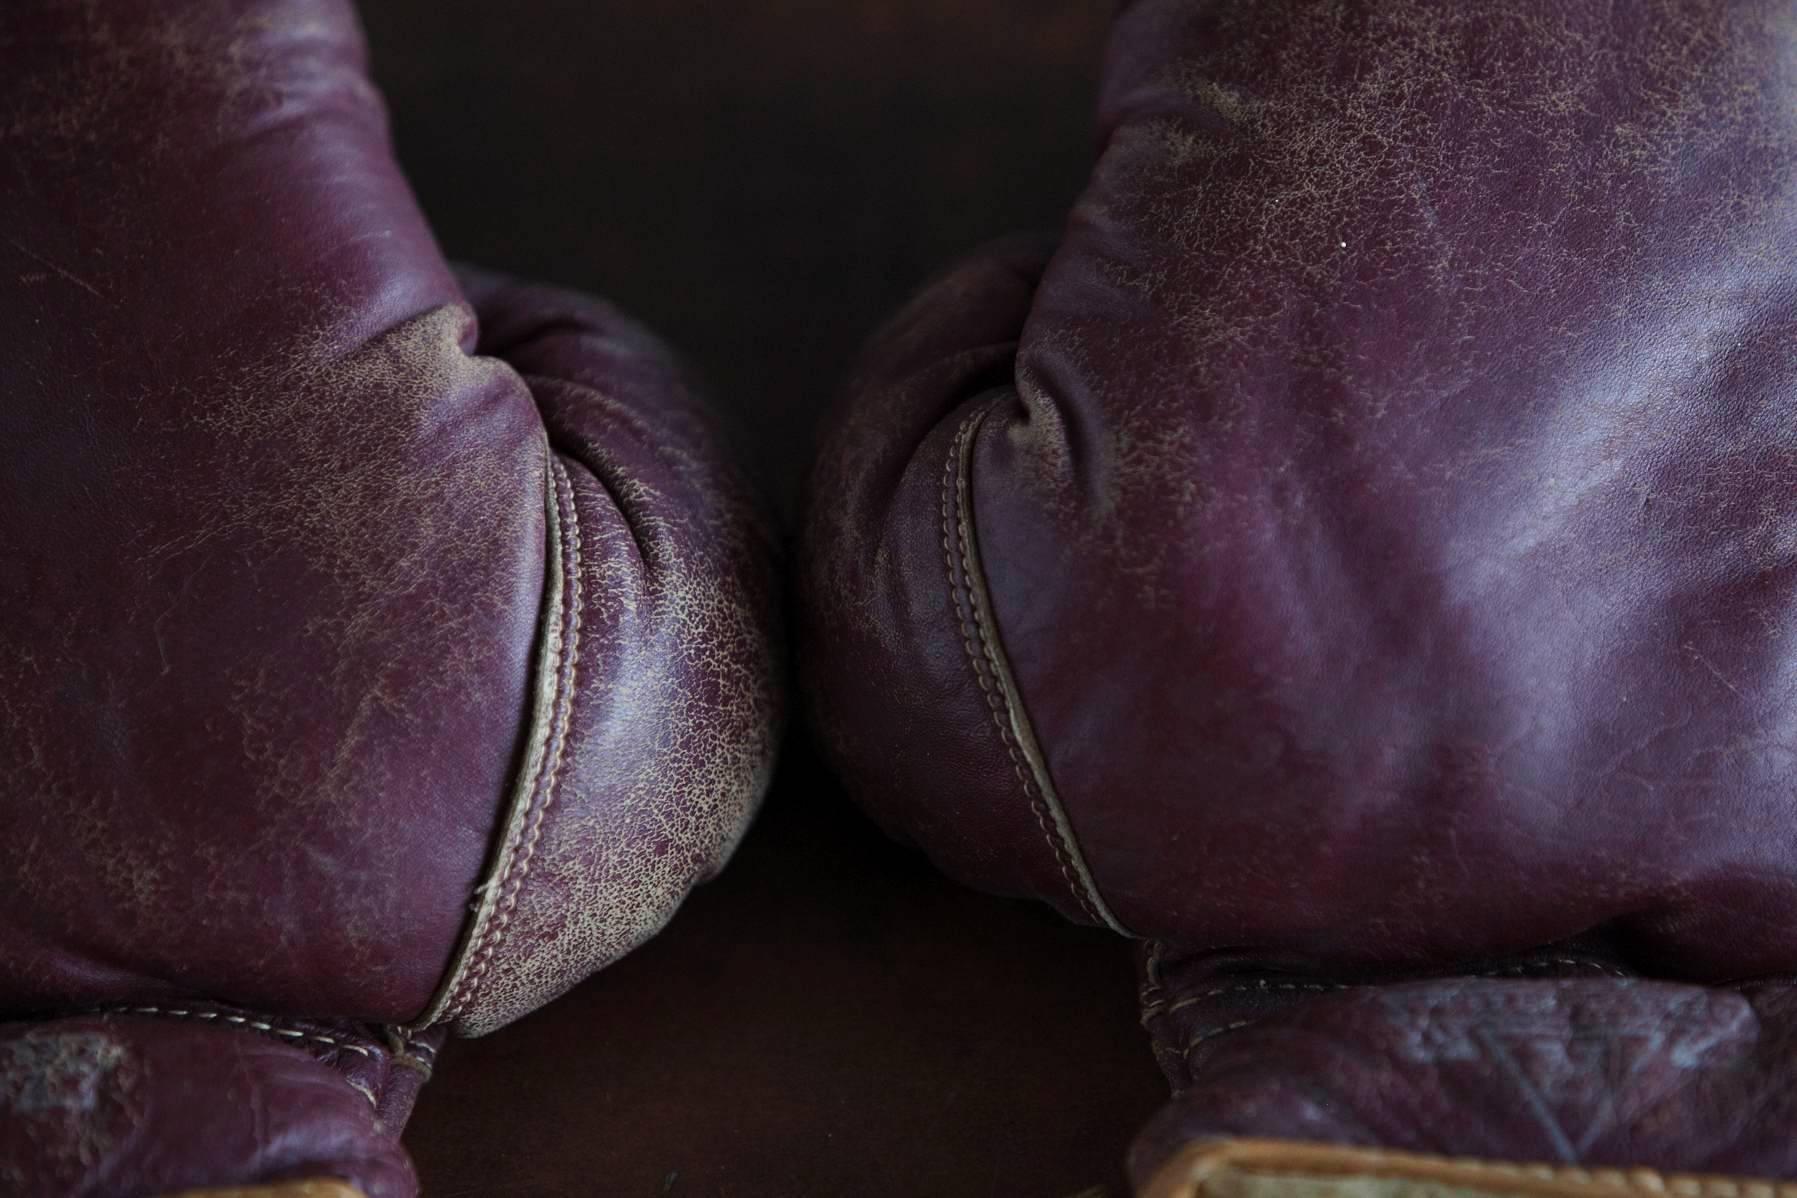 1930 boxing gloves